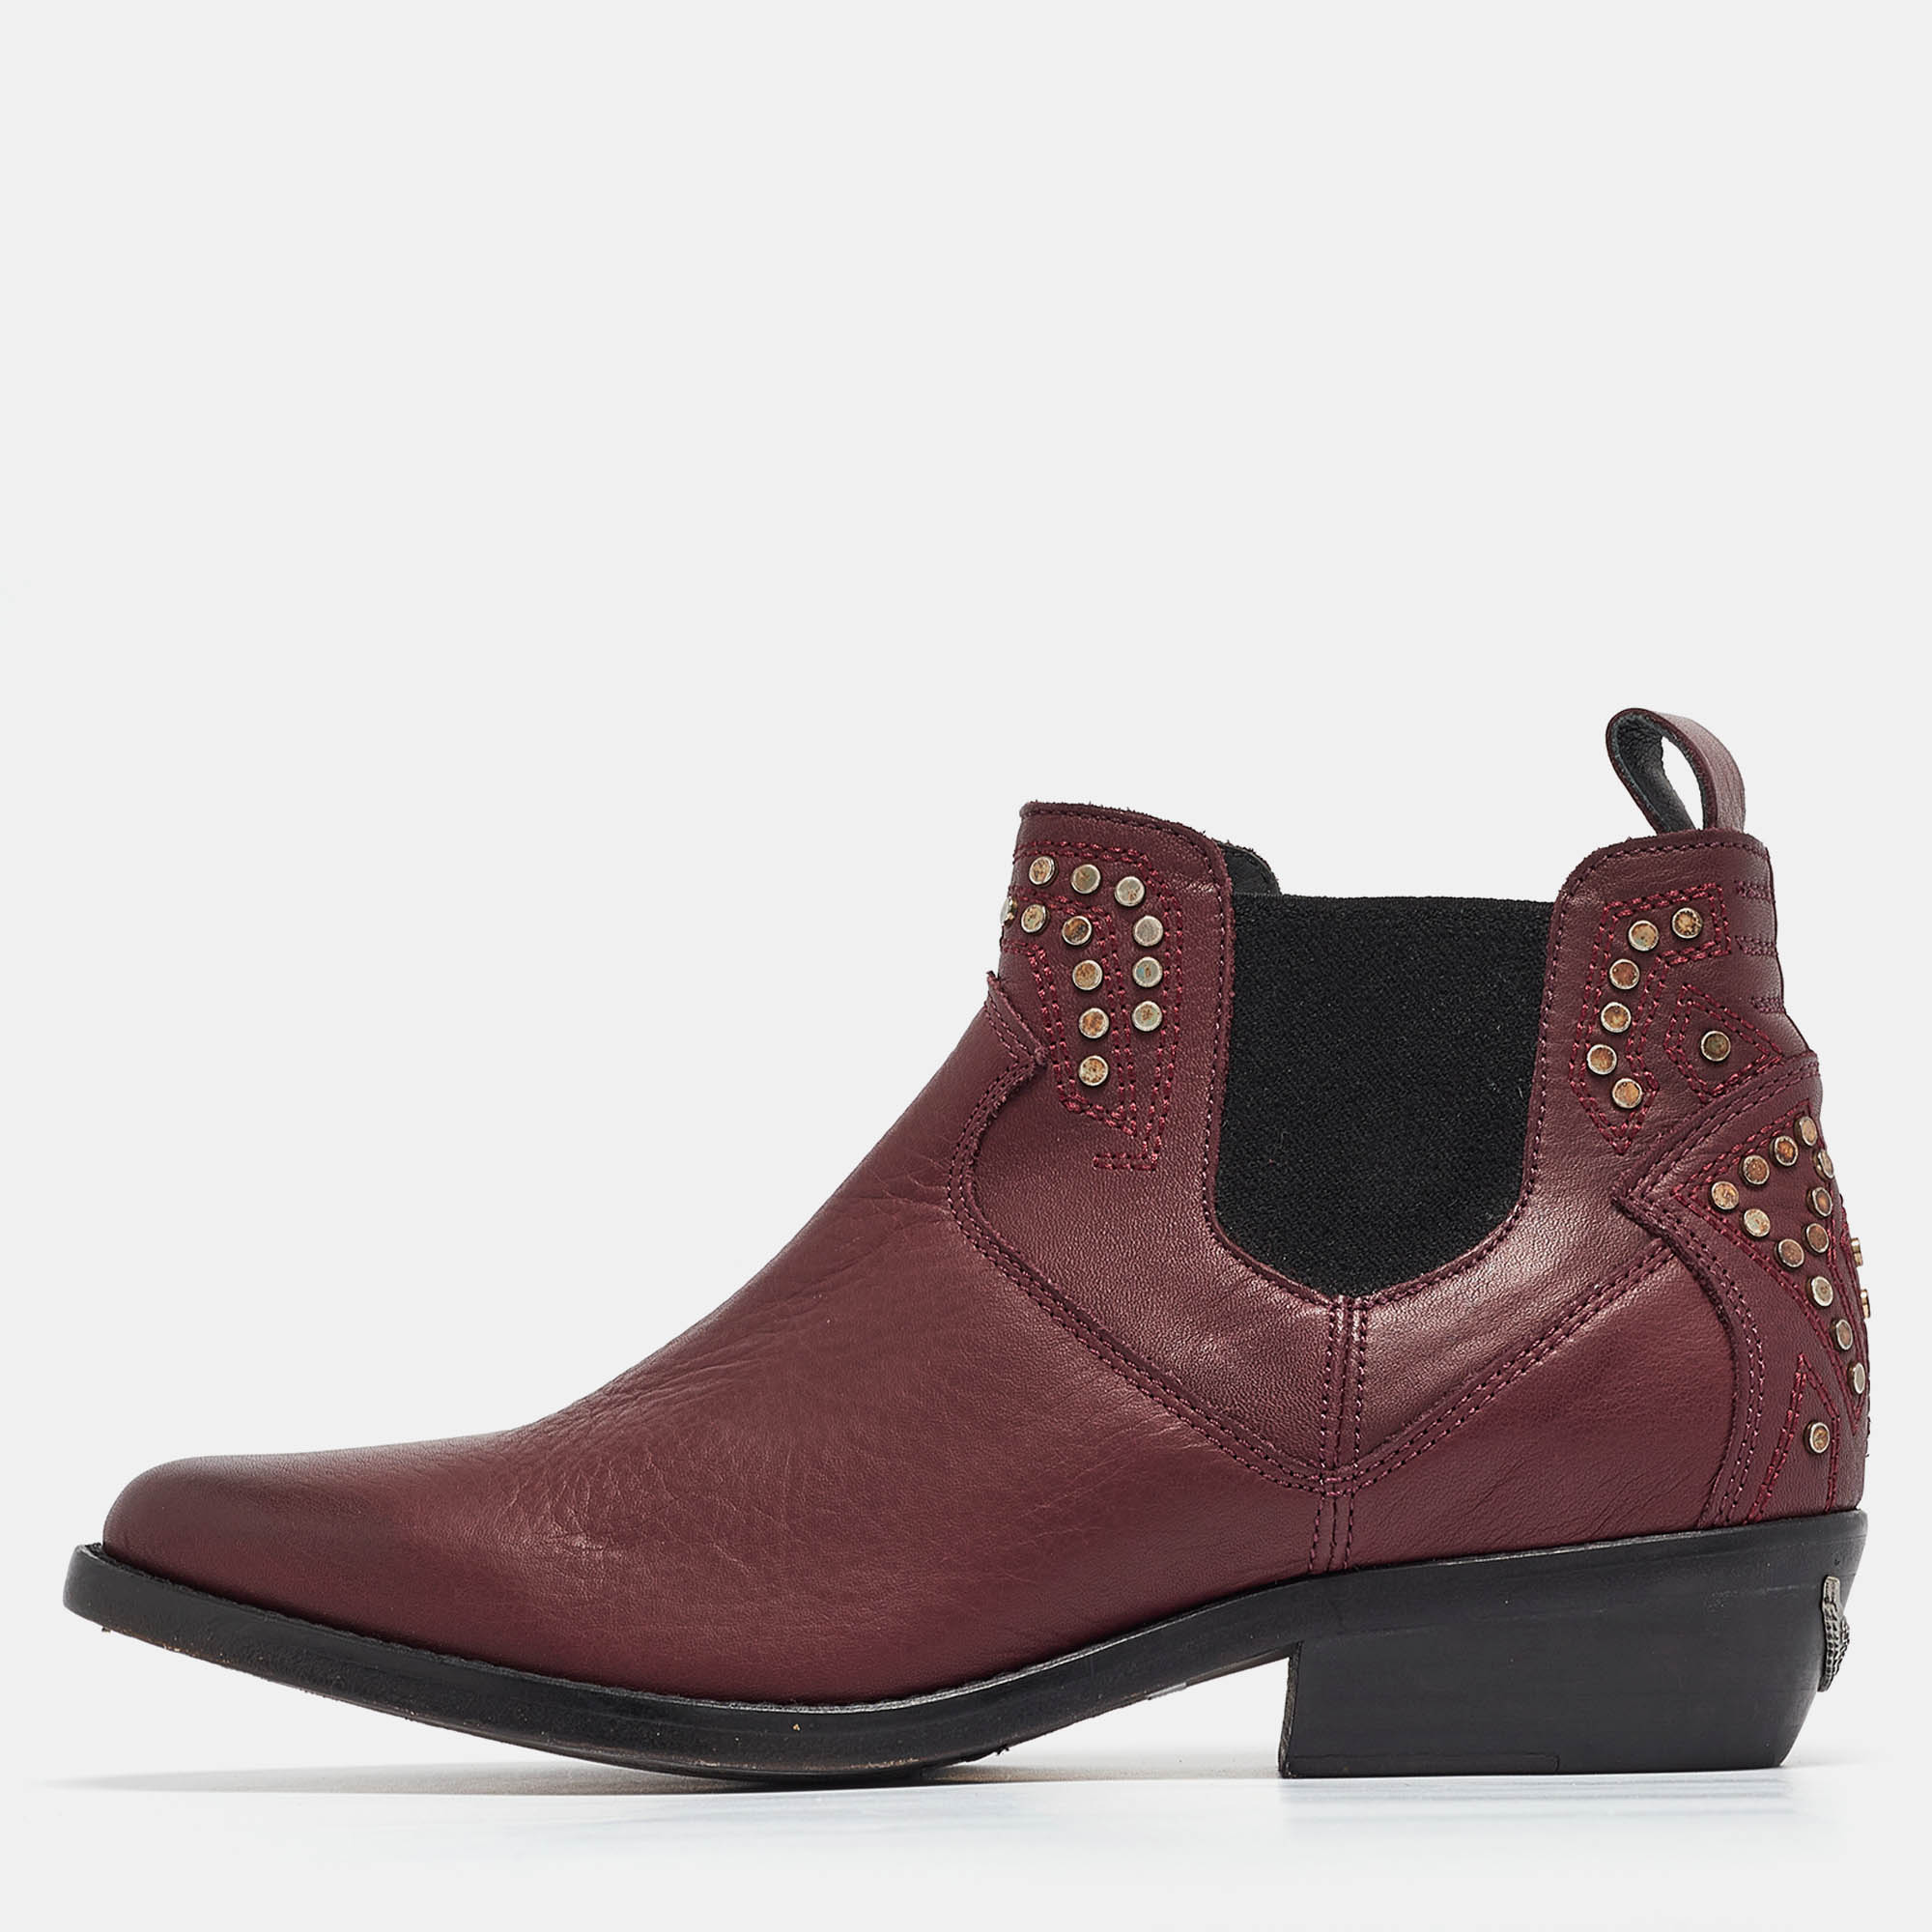 Zadig & voltaire burgundy leather thylana studded ankle booties size 37